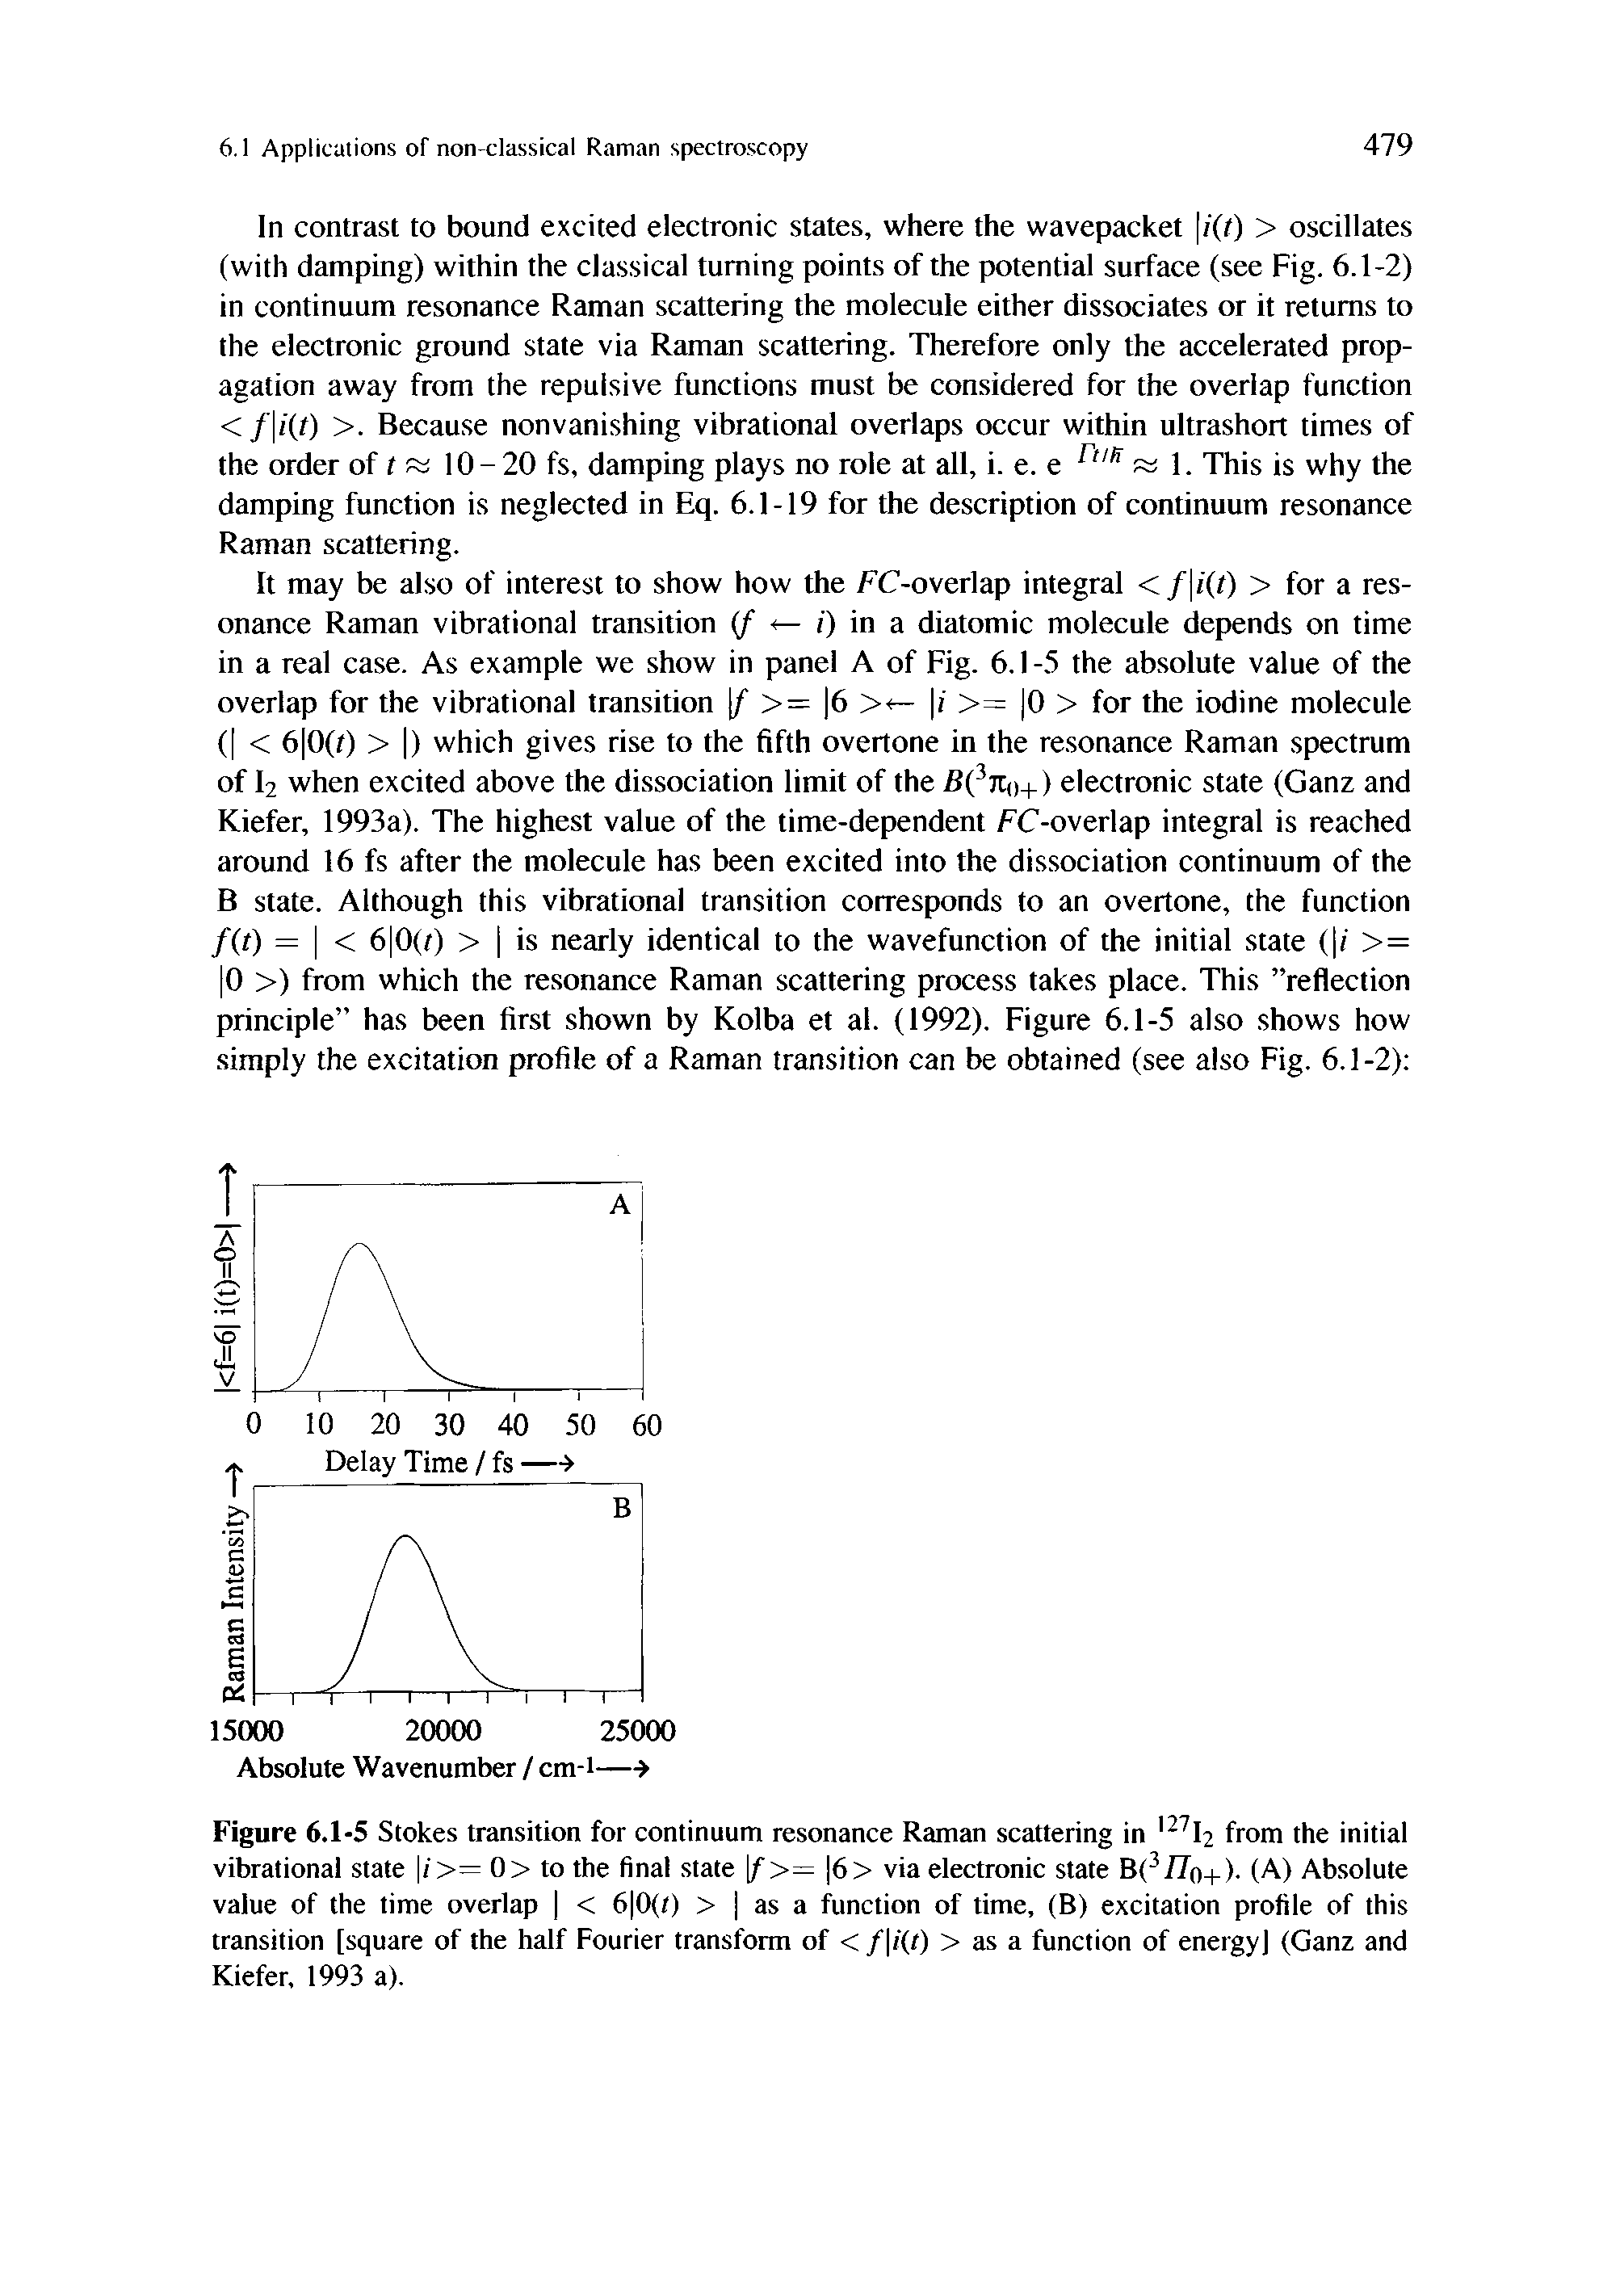 Figure 6.1-5 Stokes transition for continuum resonance Raman scattering in from the initial vibrational state />= 0> to the final state f >= 6> via electronic state B( 77o+). (A) Absolute value of the time overlap < 6 0(t) > as a function of time, (B) excitation profile of this transition [square of the half Fourier transform of < f i t) > as a function of energy] (Ganz and Kiefer, 1993 a).